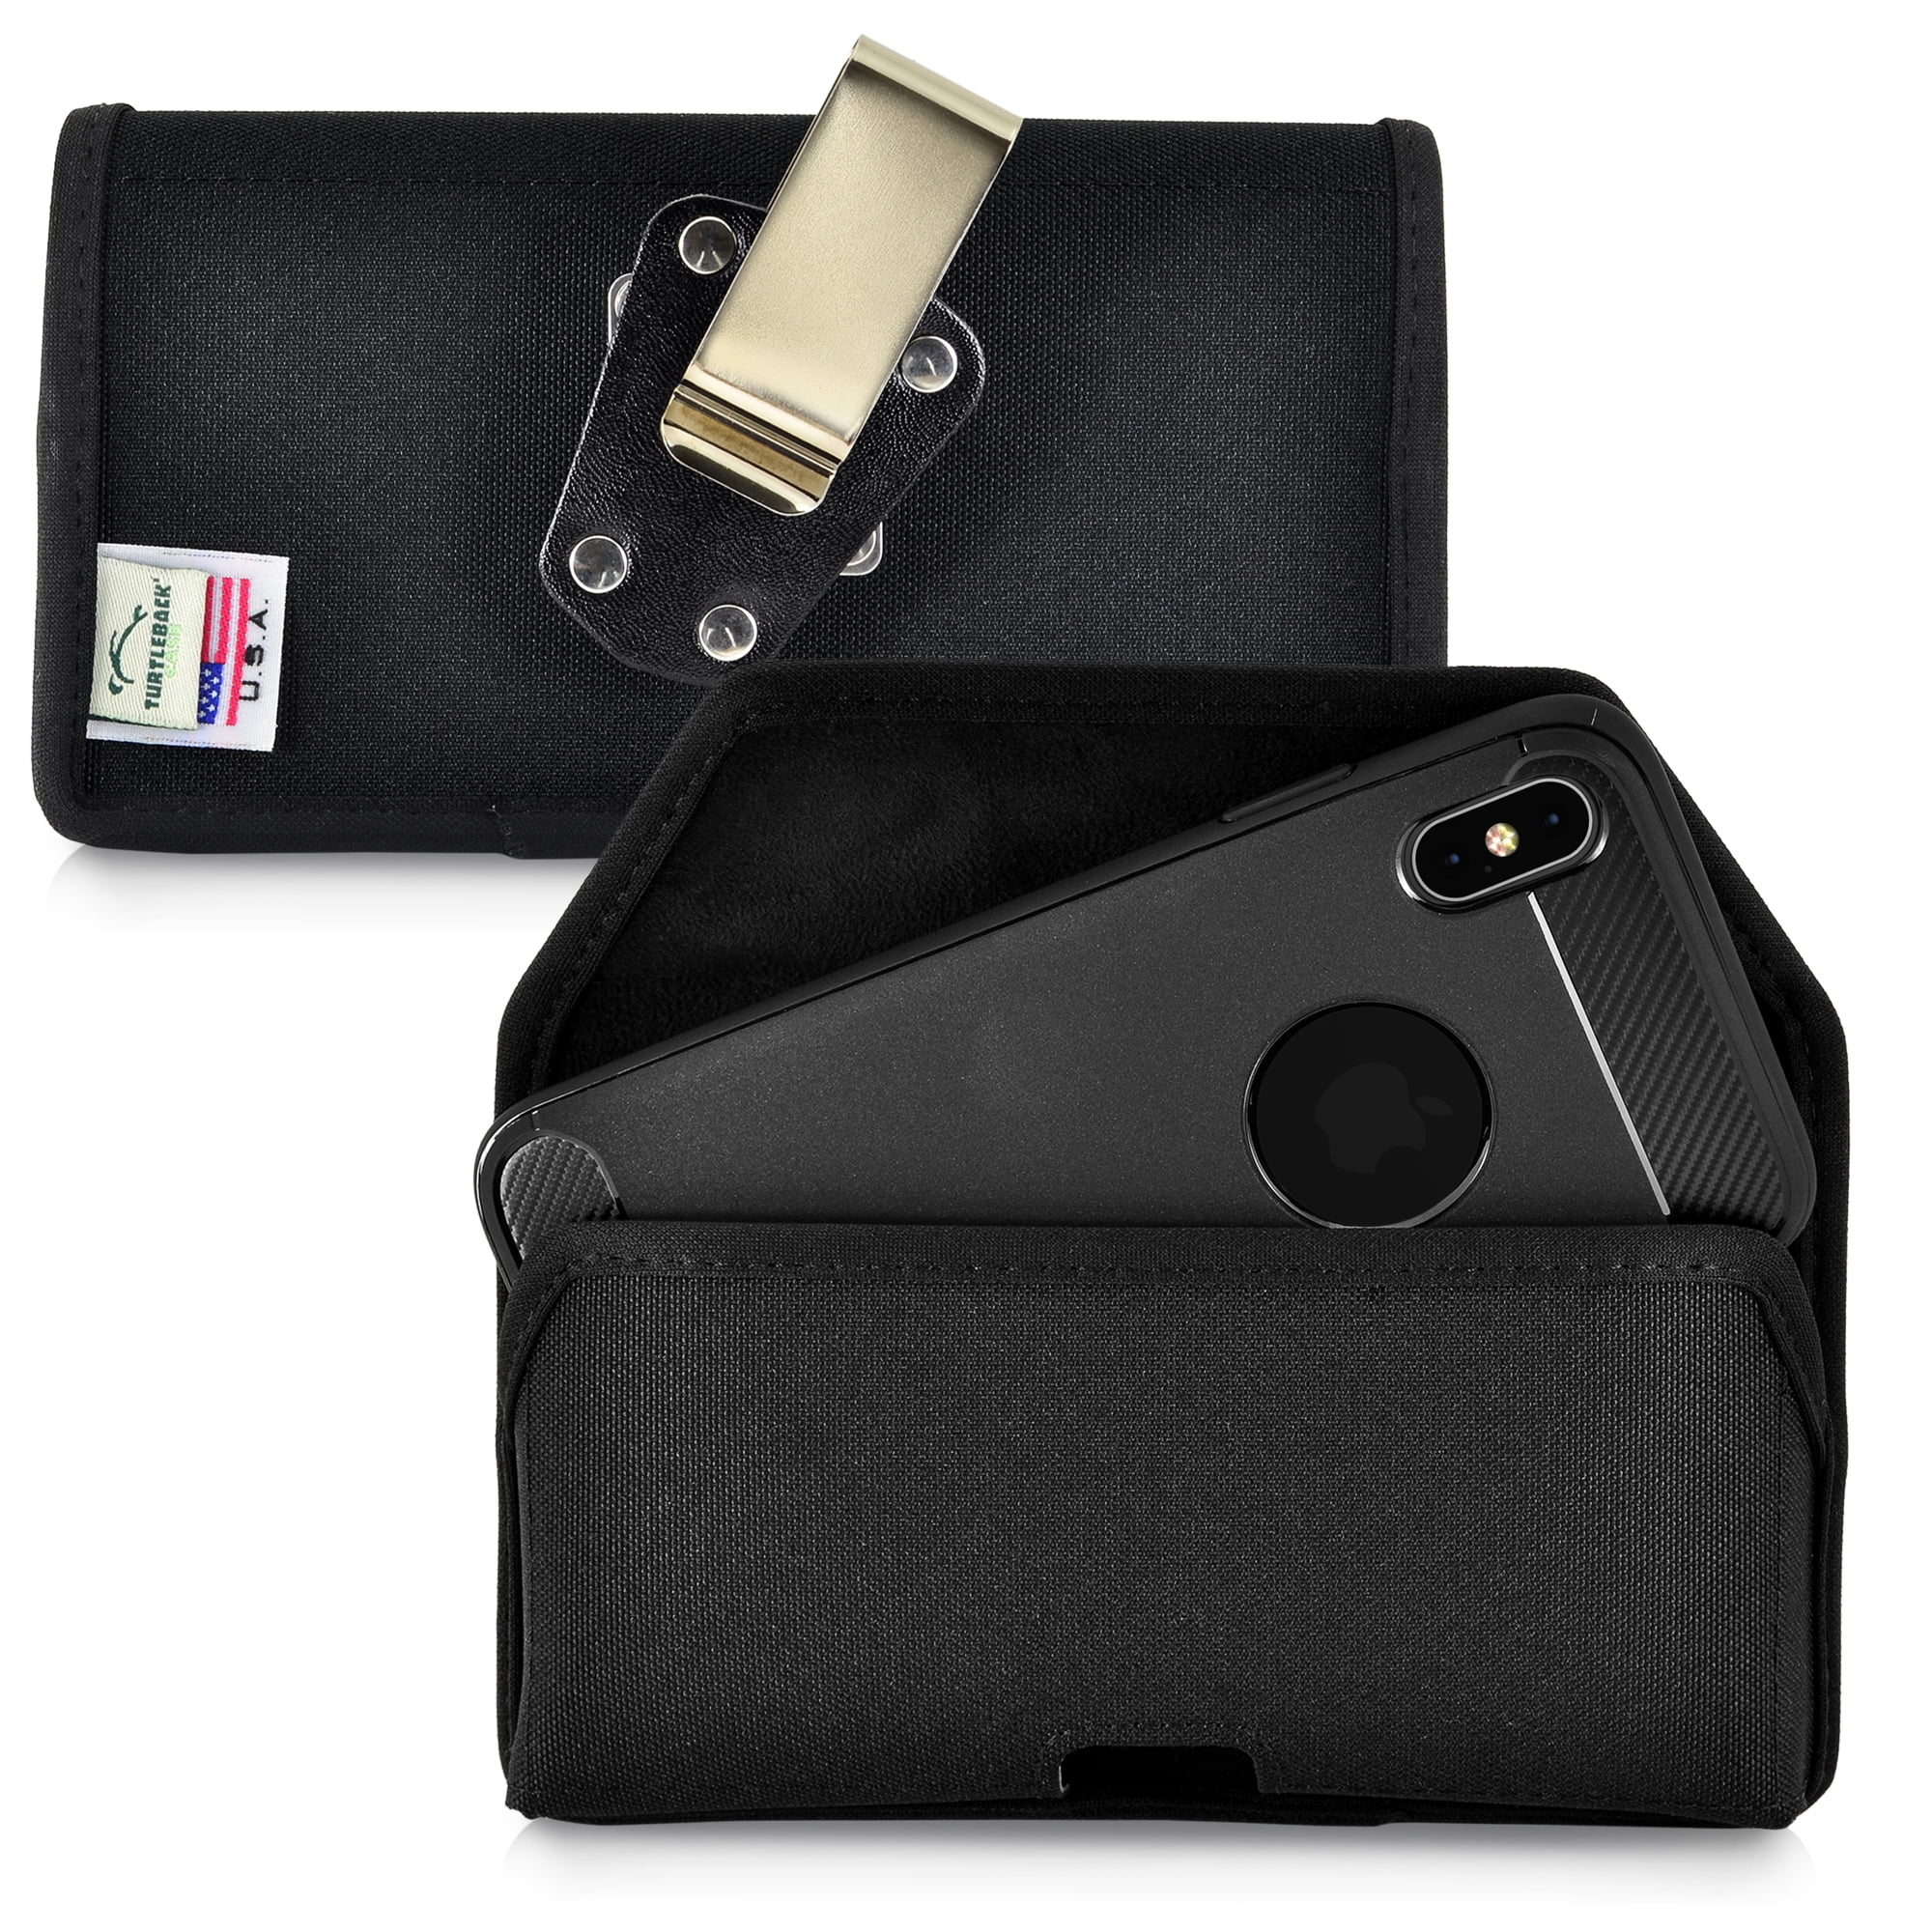 Turtleback Belt Clip Case Designed for iPhone 11 Pro Max (2019) and iPhone XS MAX (2018) Holster ...